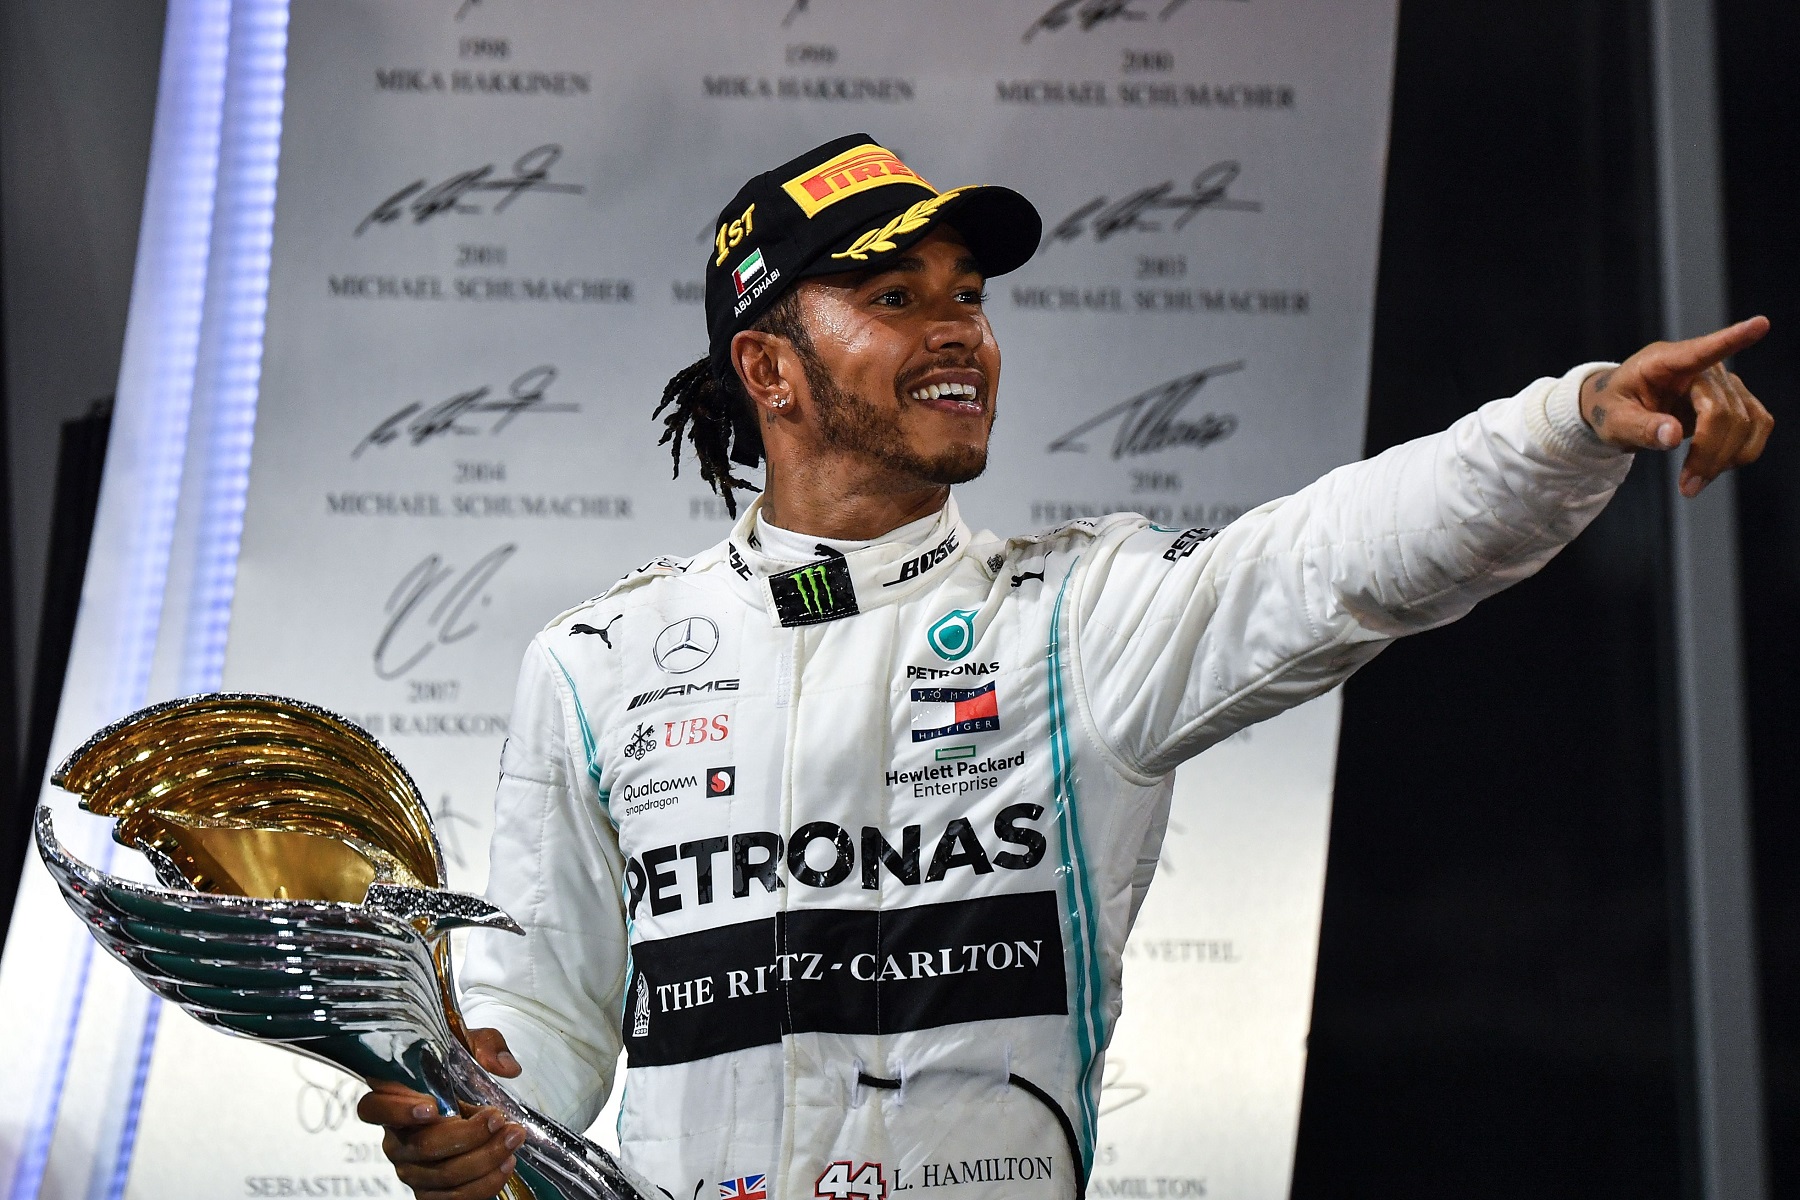 Lewis Hamilton Is Near the Bottom of This Formula 1 Drivers Ranking